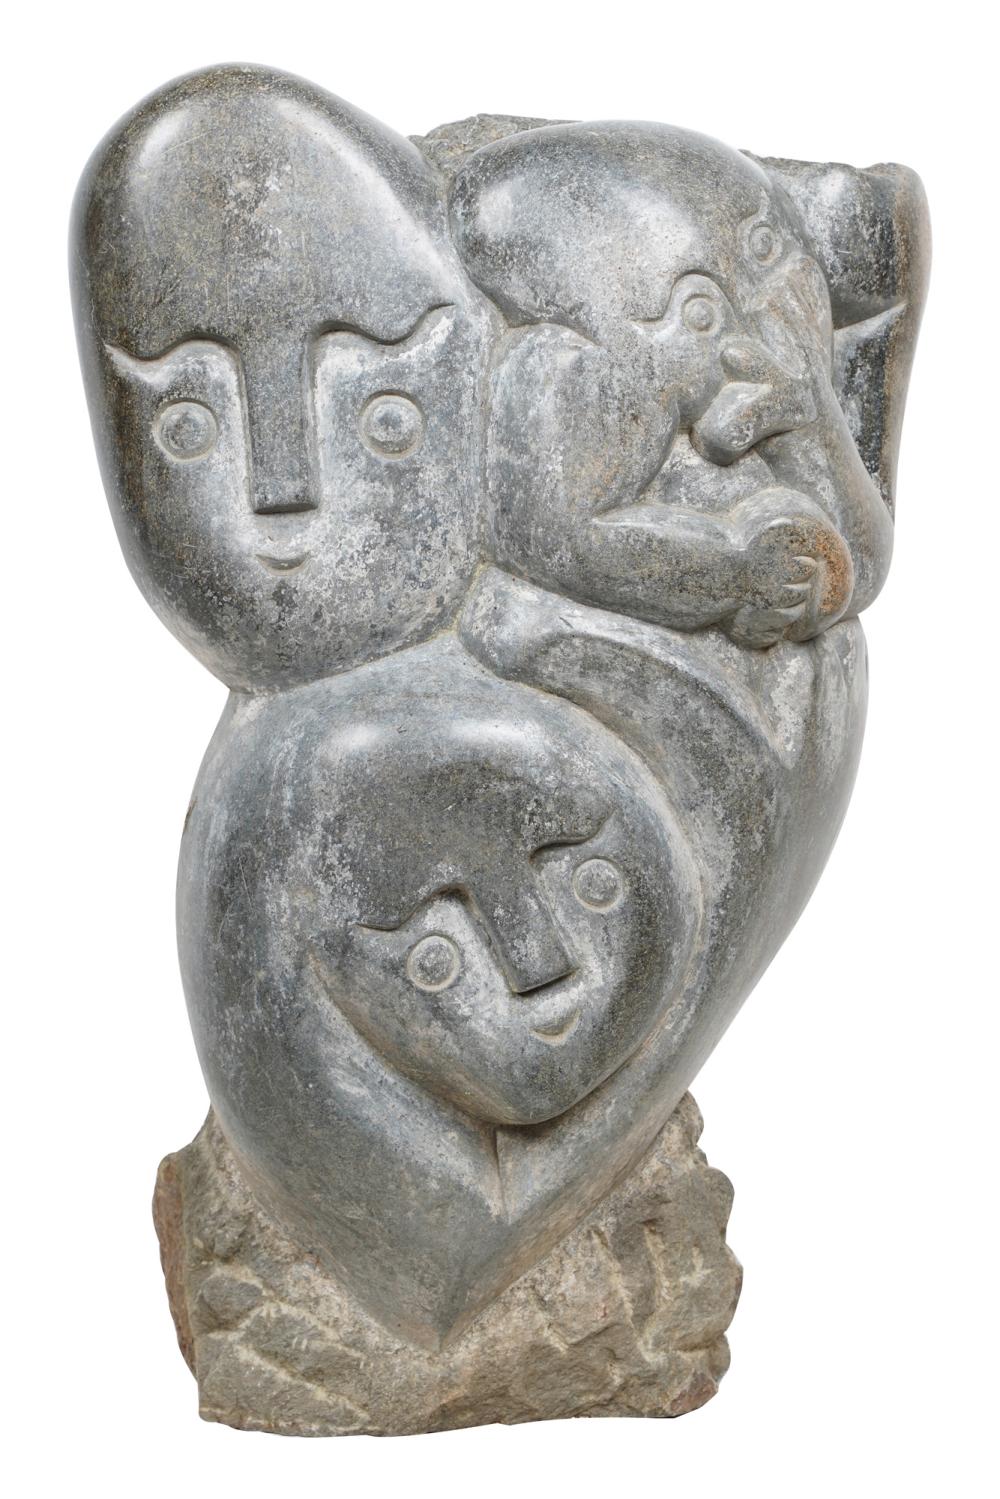 STONE CARVING OF THREE FACES16 inches